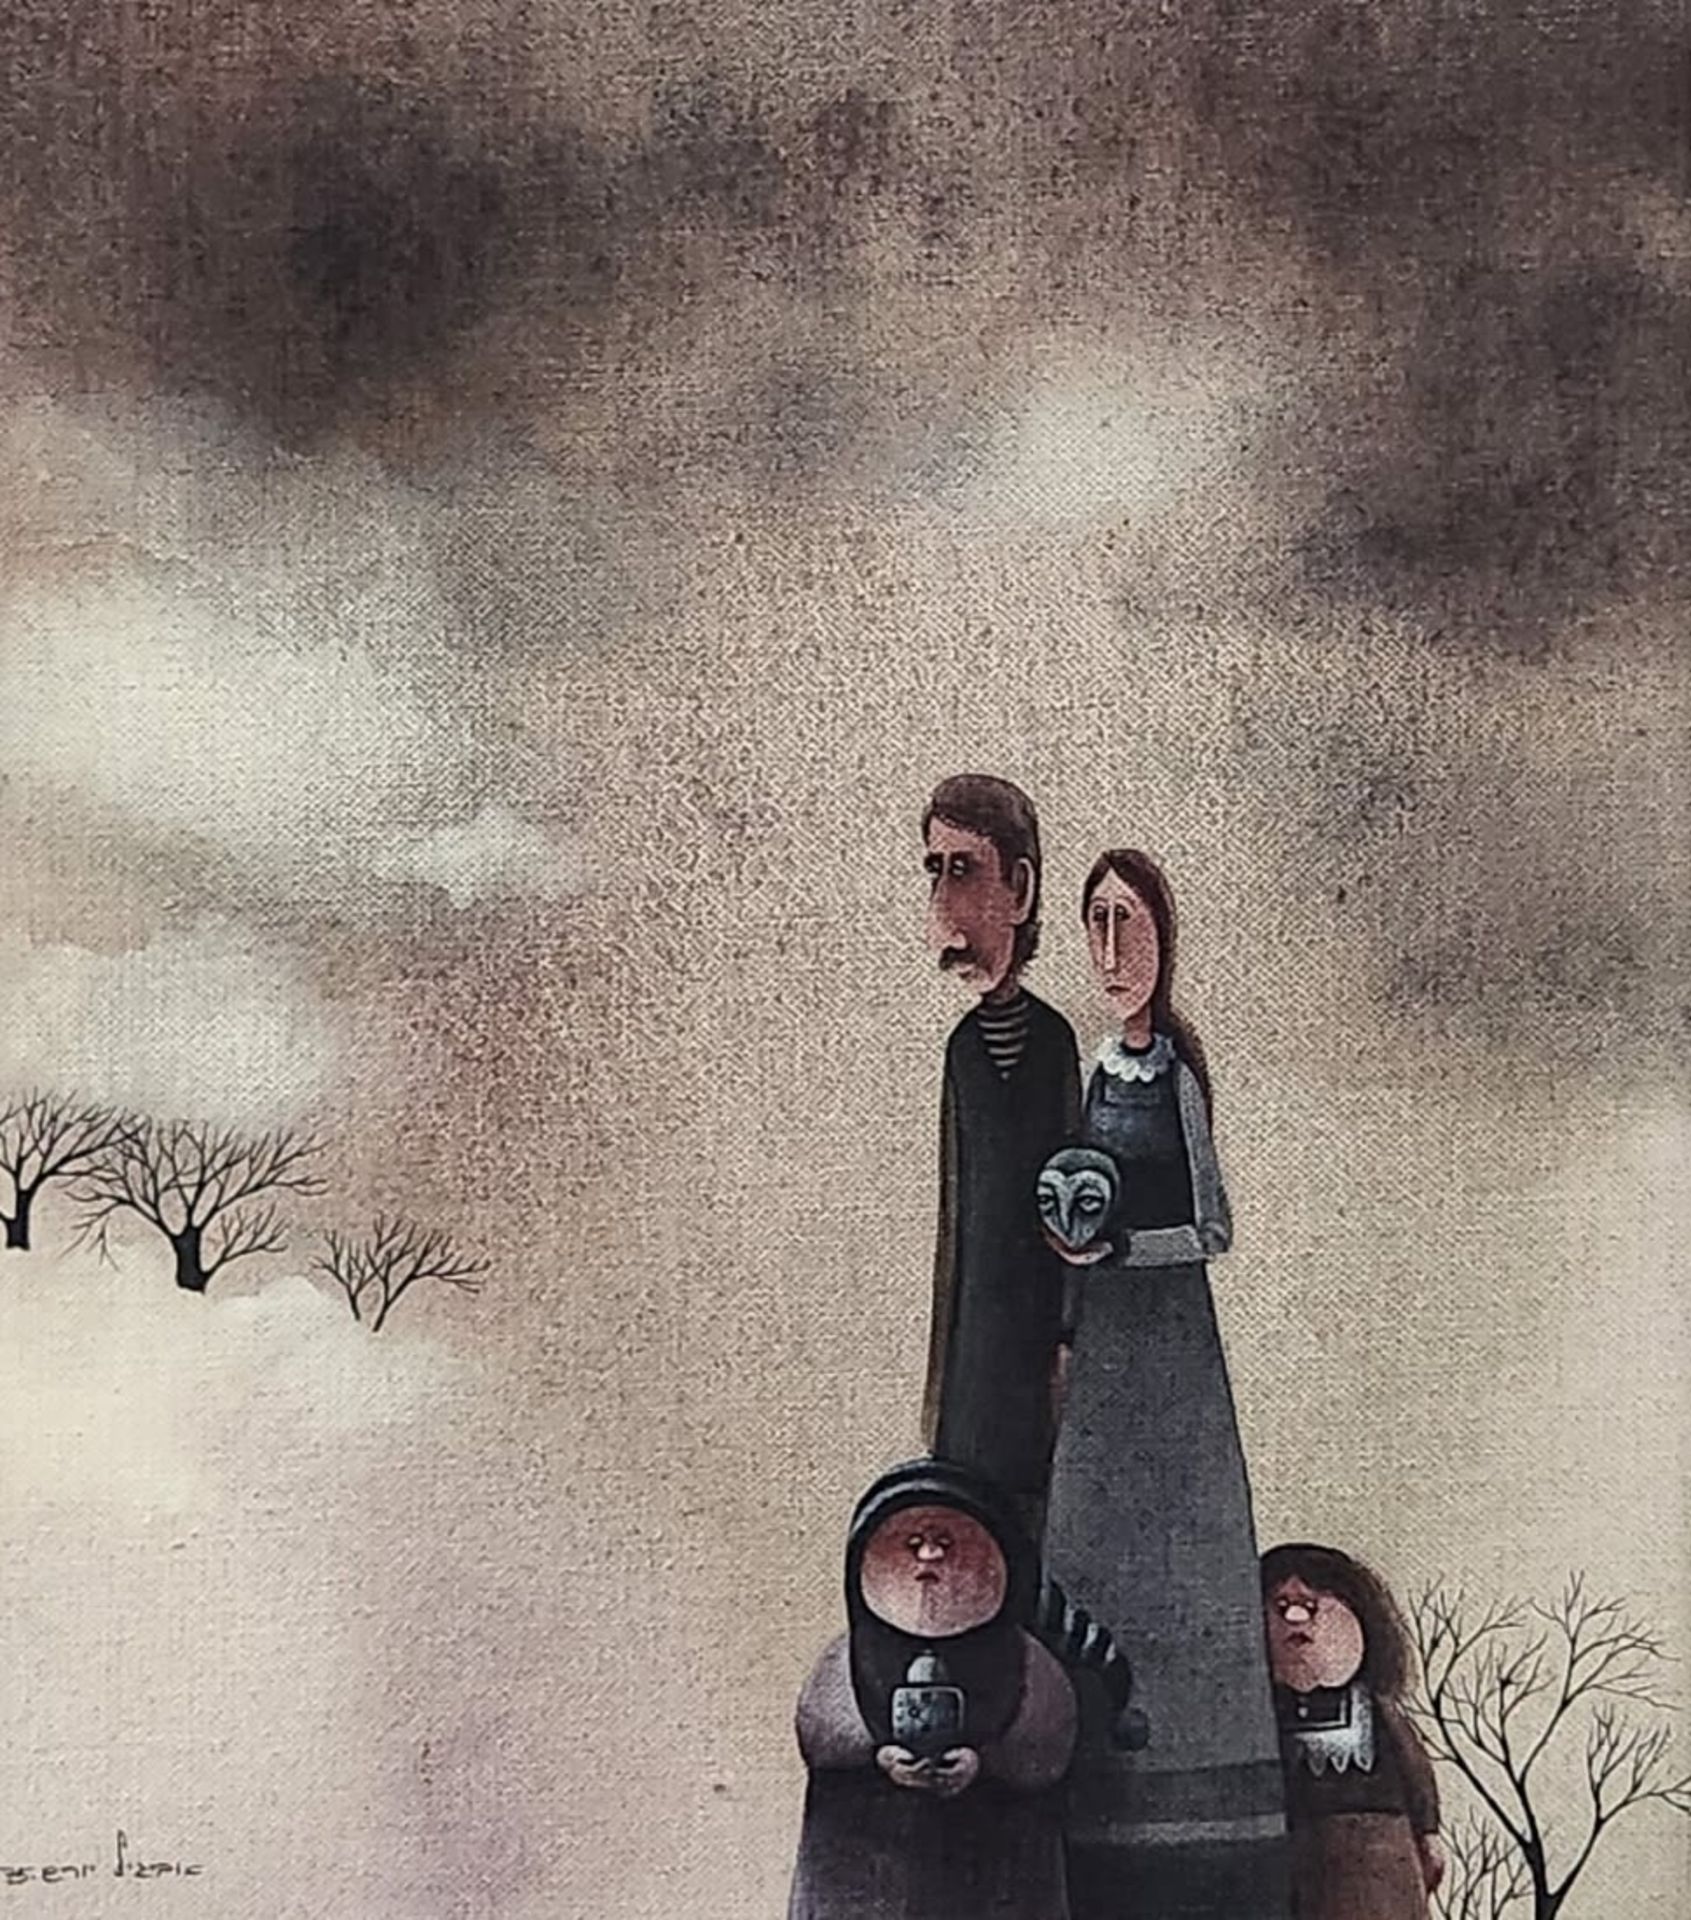 'Family in the snow' - Avigail Yoresh, oil on French canvas, signed and dated 1975, Dimensions: 28.